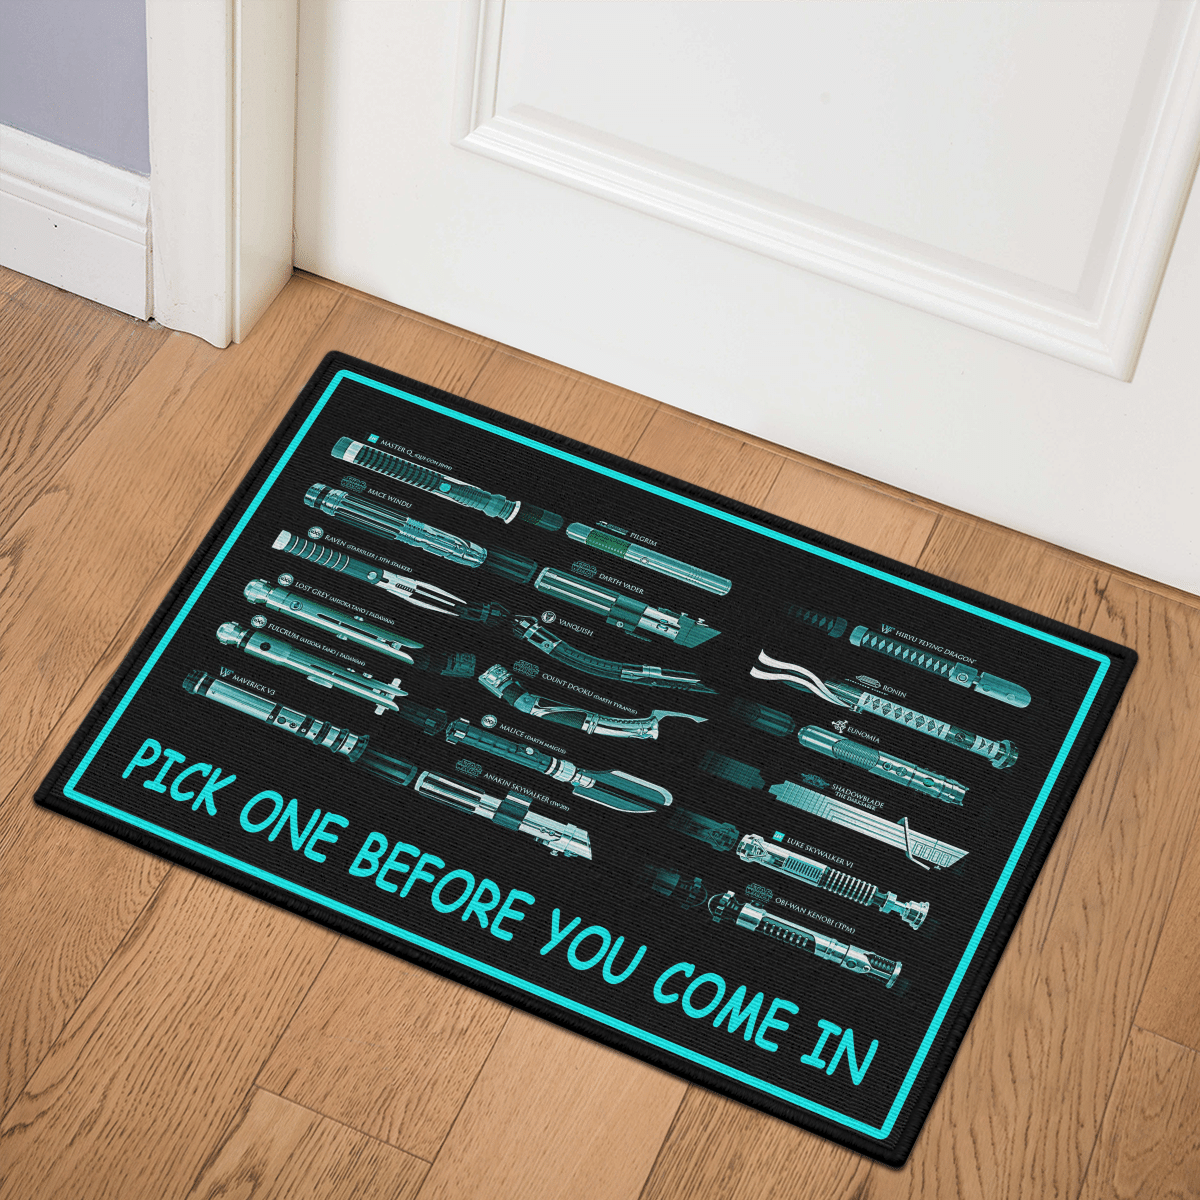 Star War Weapons pick one before you come in doormat – LIMITED EDITION